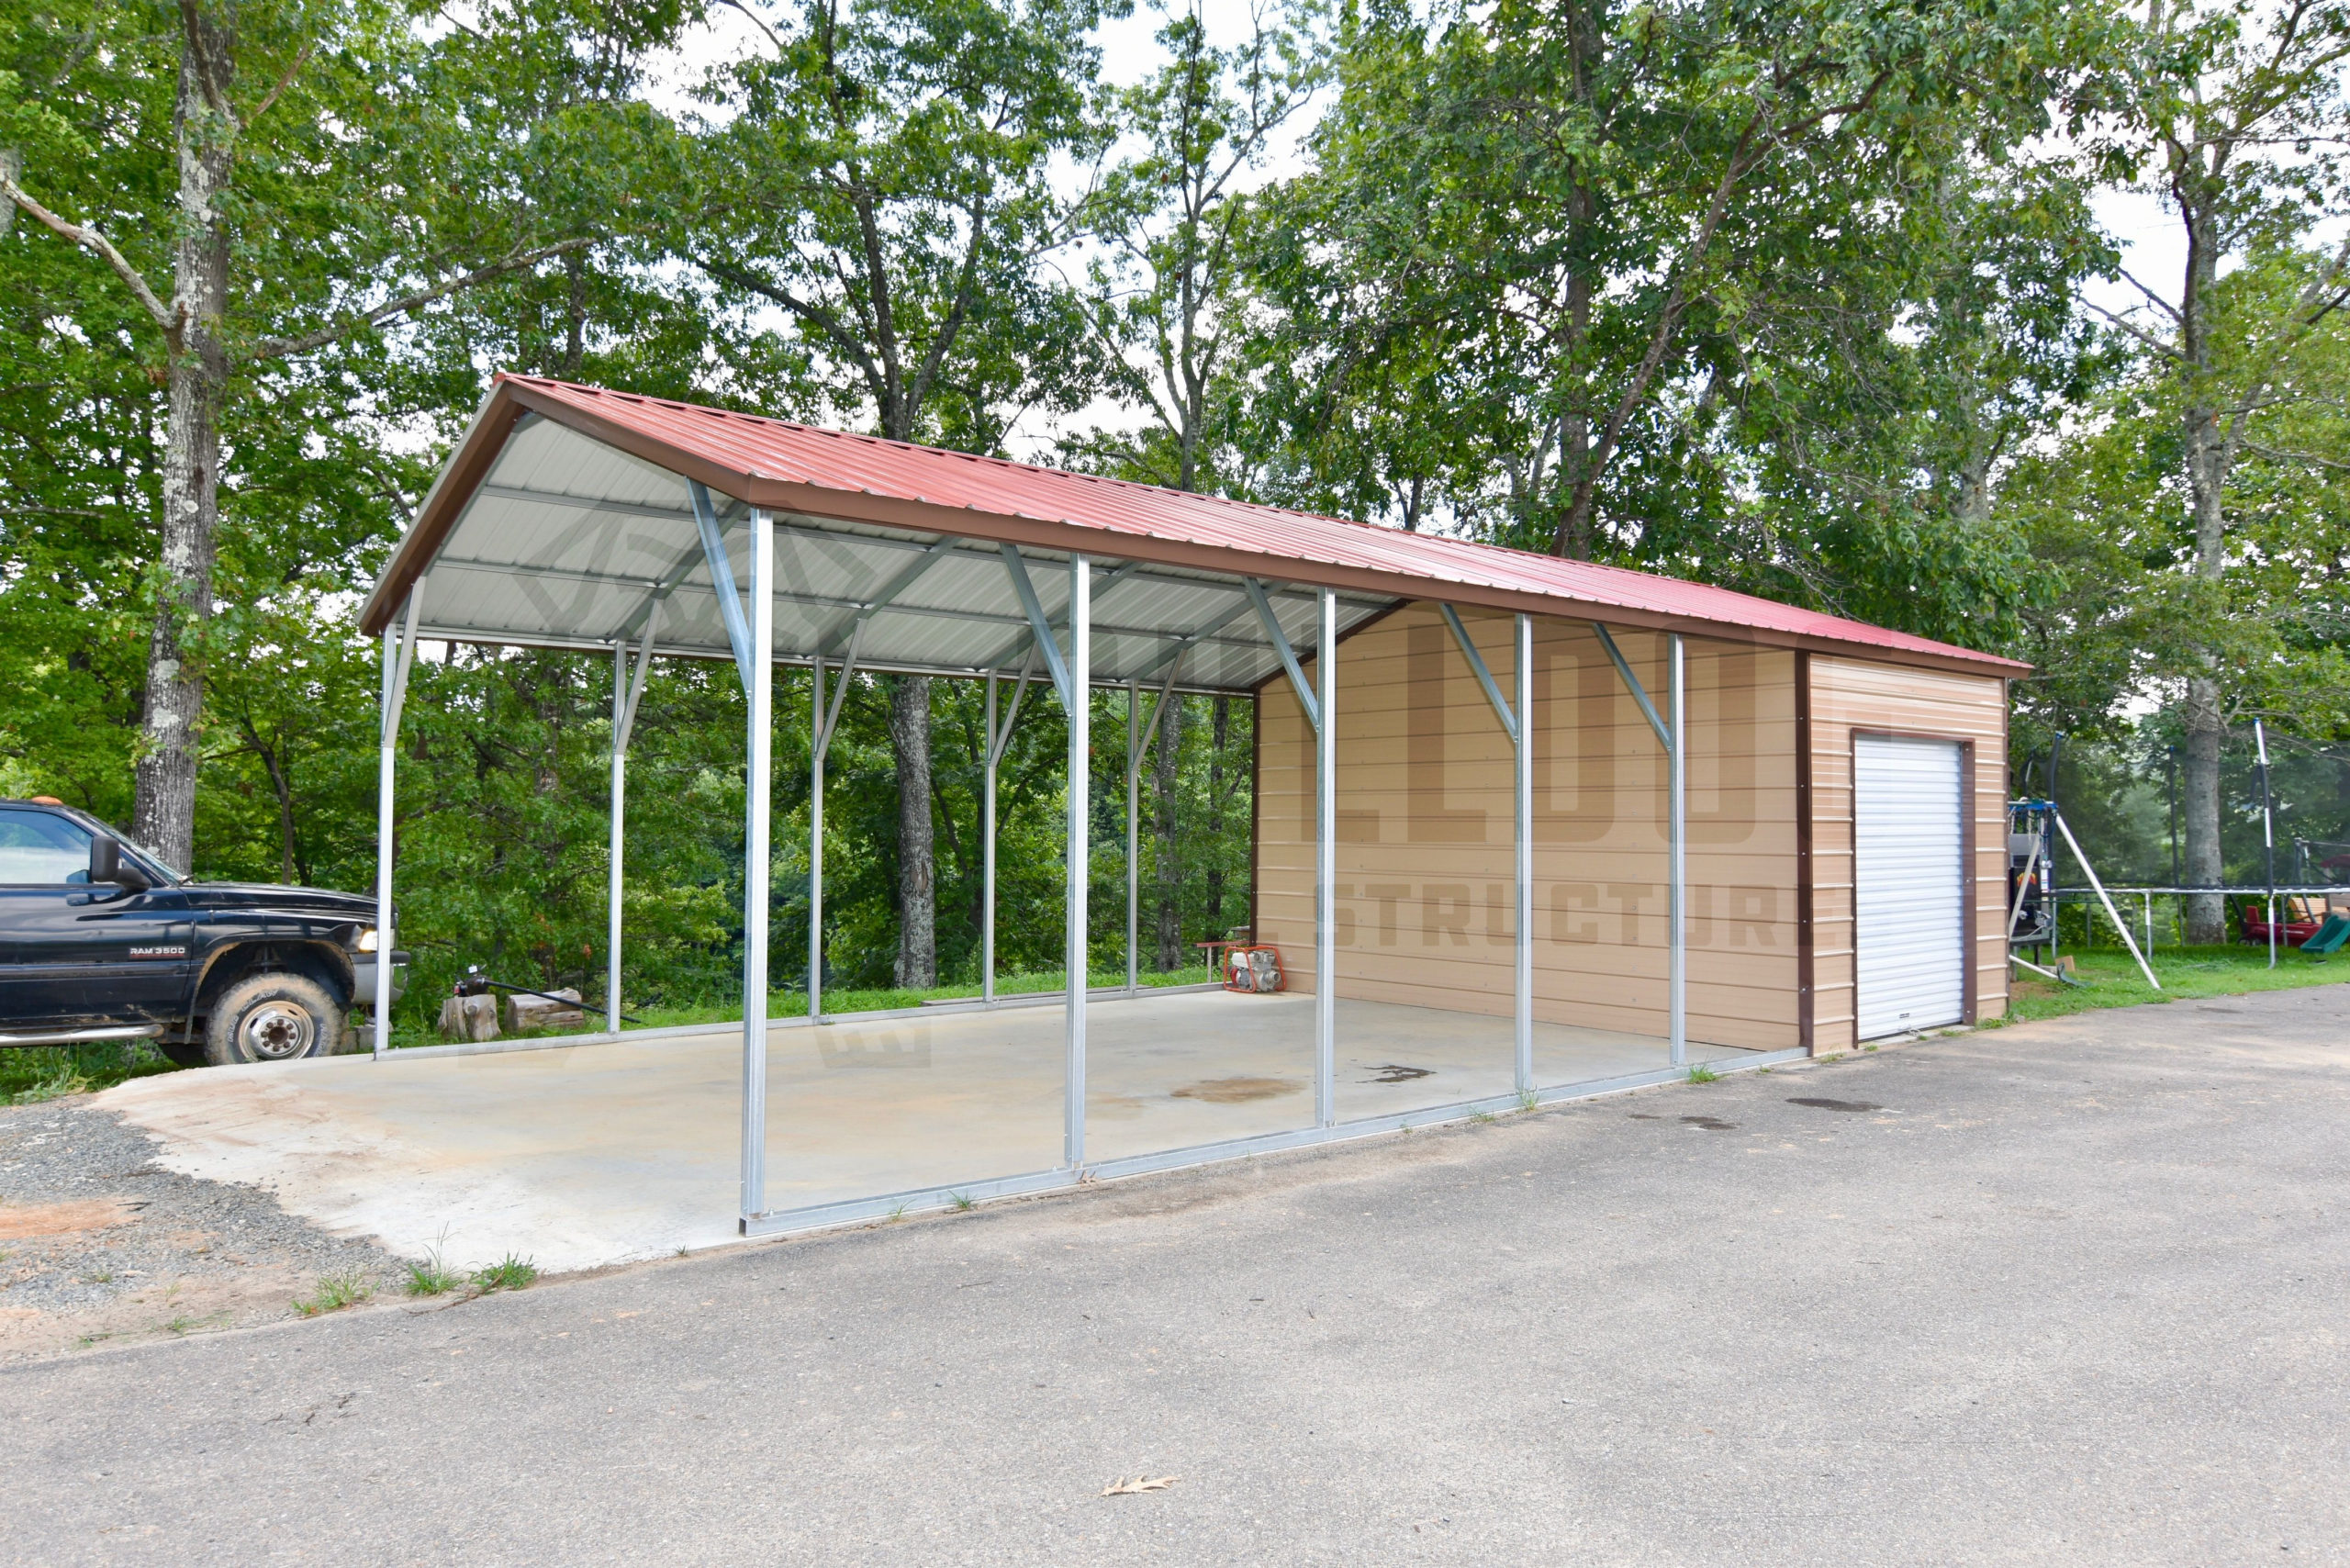 Car port with storage shed attached